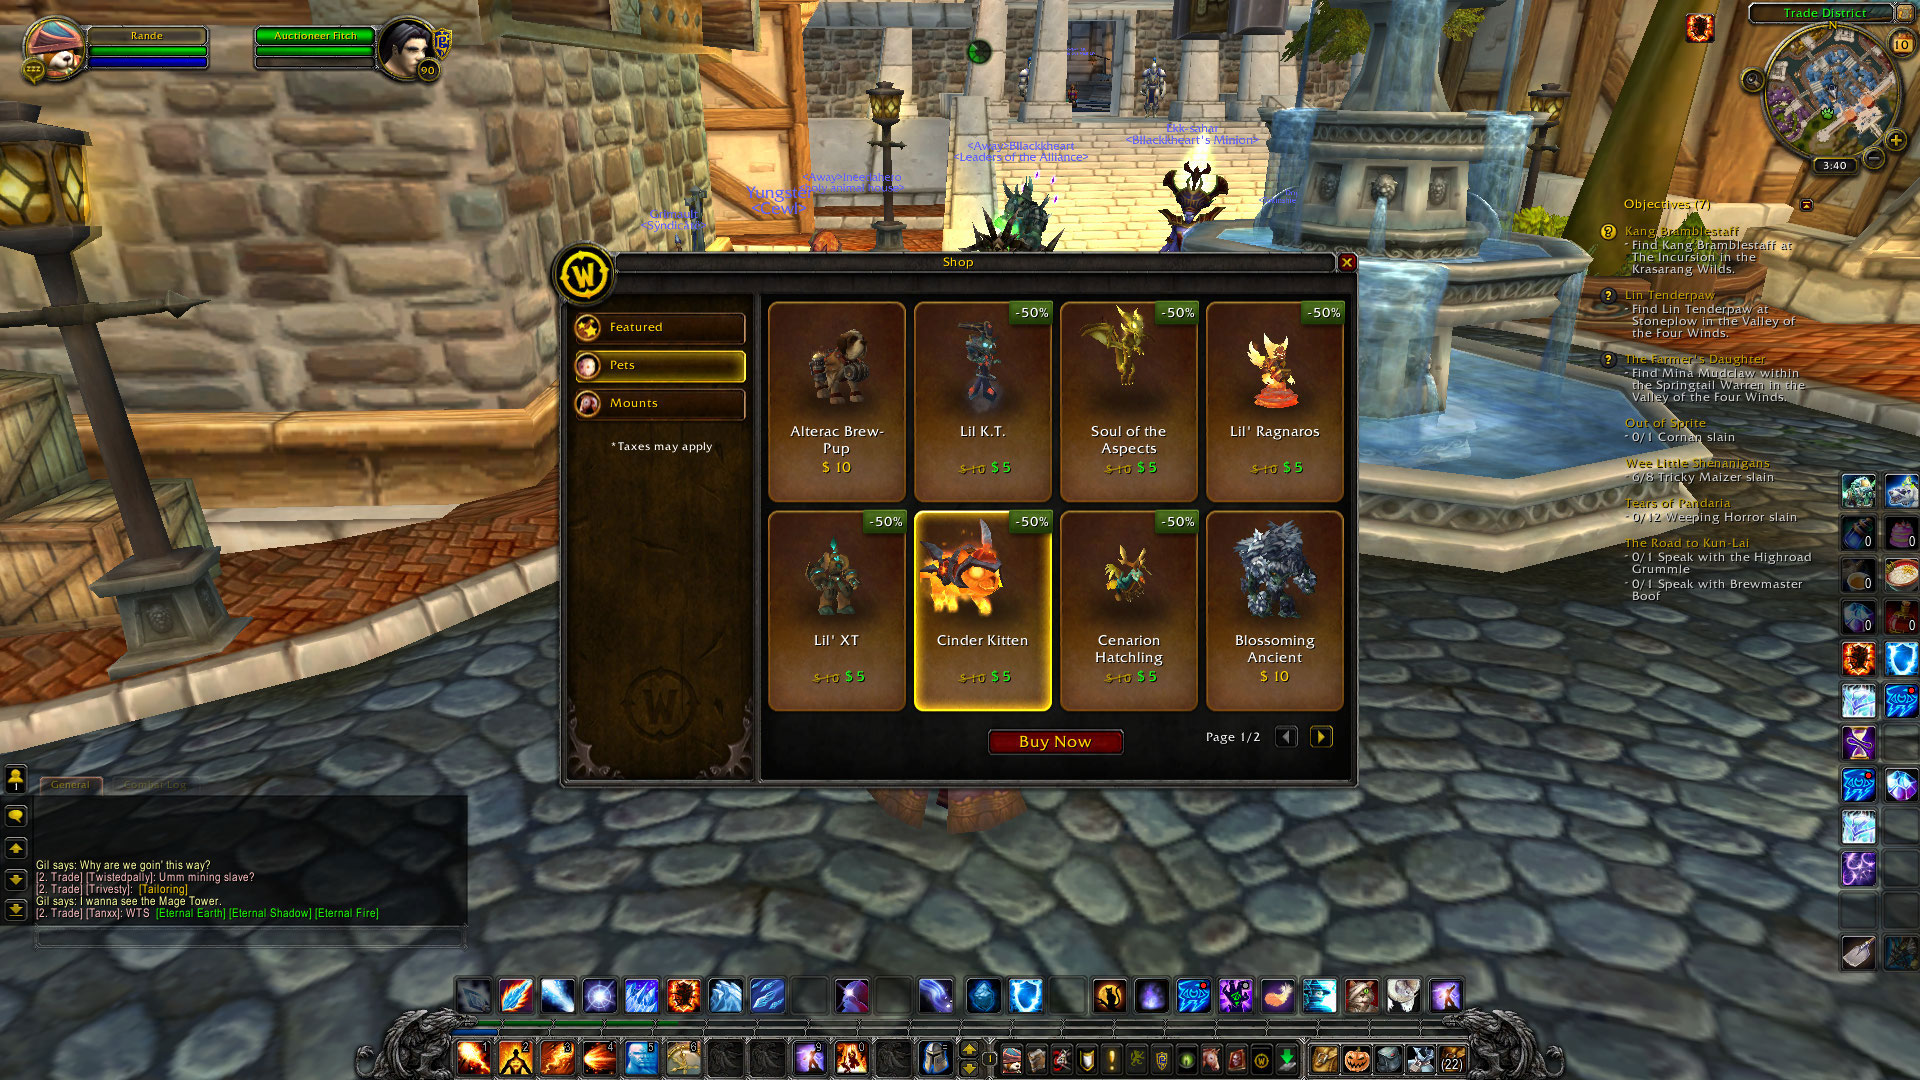 Oh Good, Now We Can Buy Virtual Pets Inside Of World Of Warcraft